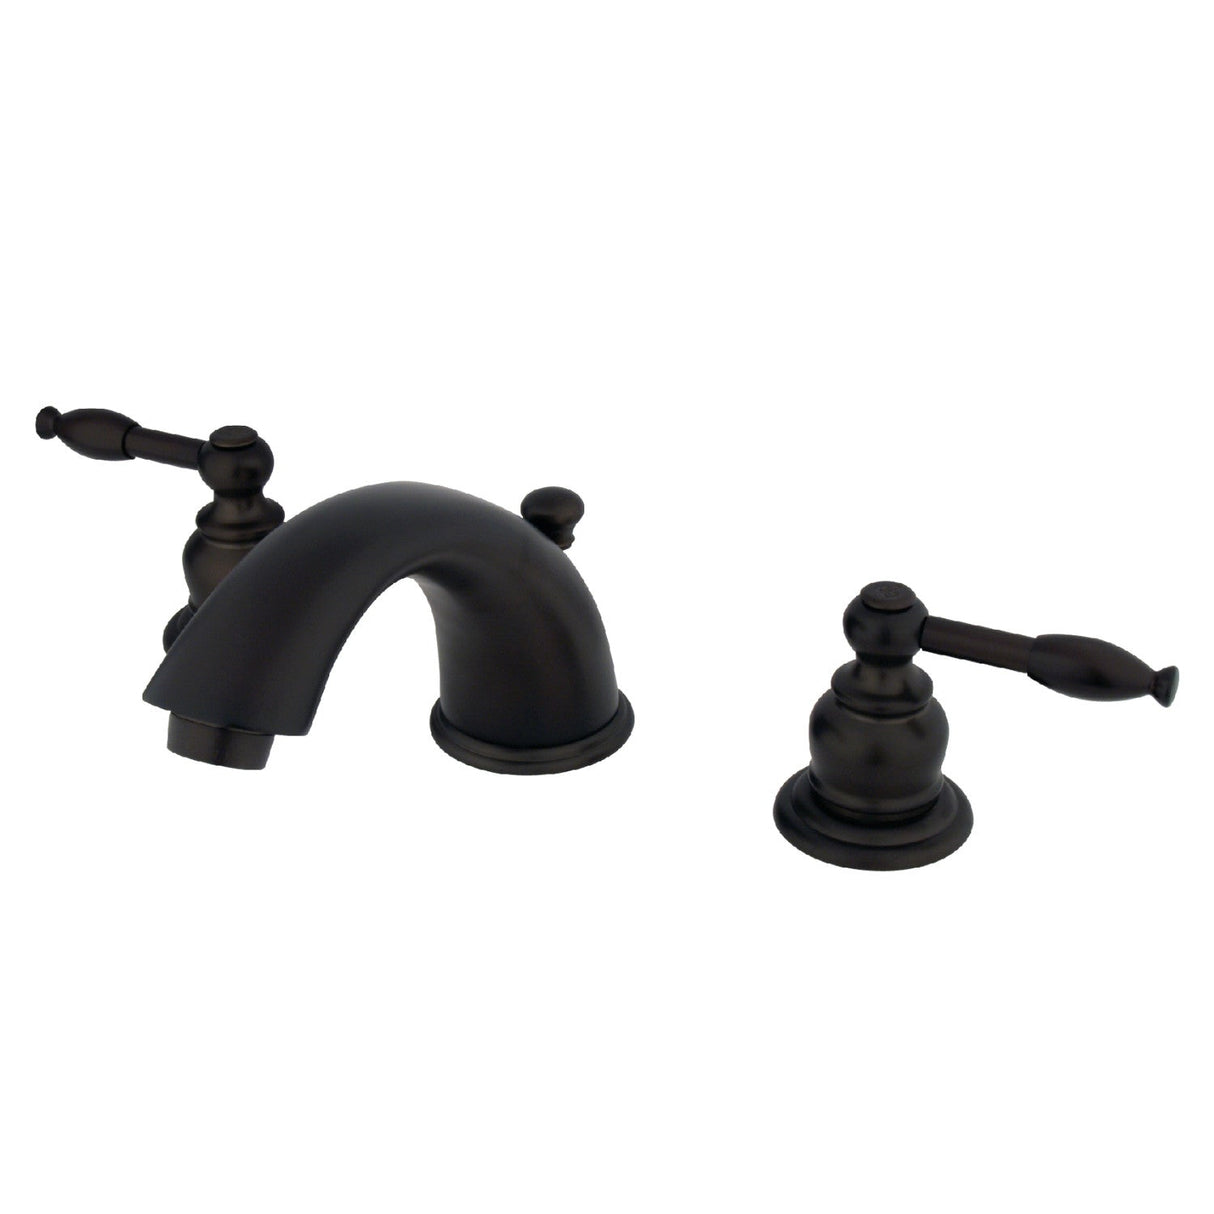 Magellan KB965KL Two-Handle 3-Hole Deck Mount Widespread Bathroom Faucet with Plastic Pop-Up, Oil Rubbed Bronze